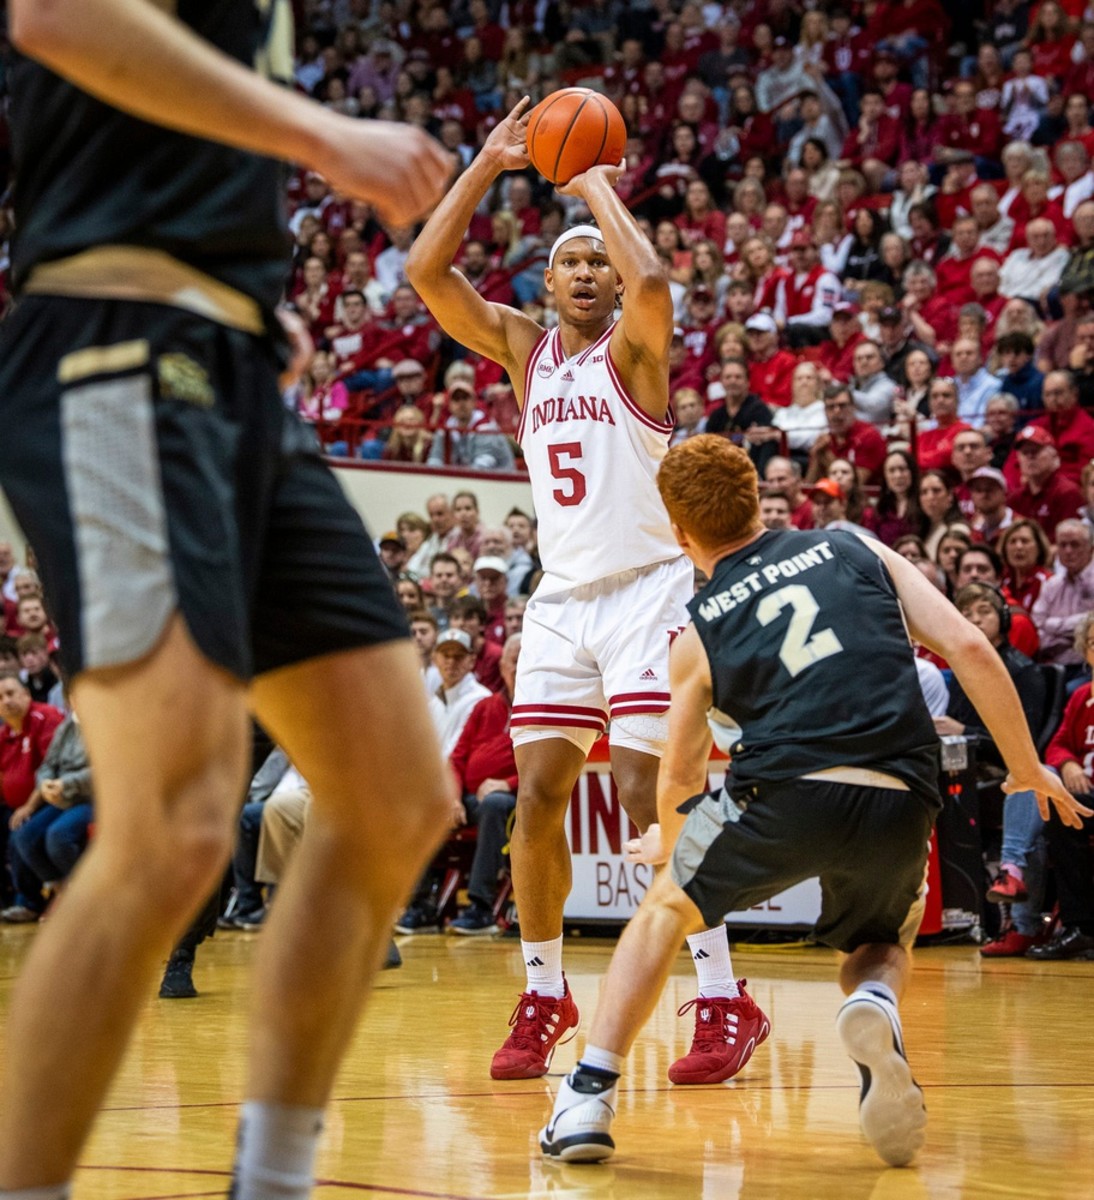 Indiana's Malik Reneau (5) shoots over Army's Ryan Curry (2) during the first half of the Indiana versus Army men's basketball game.